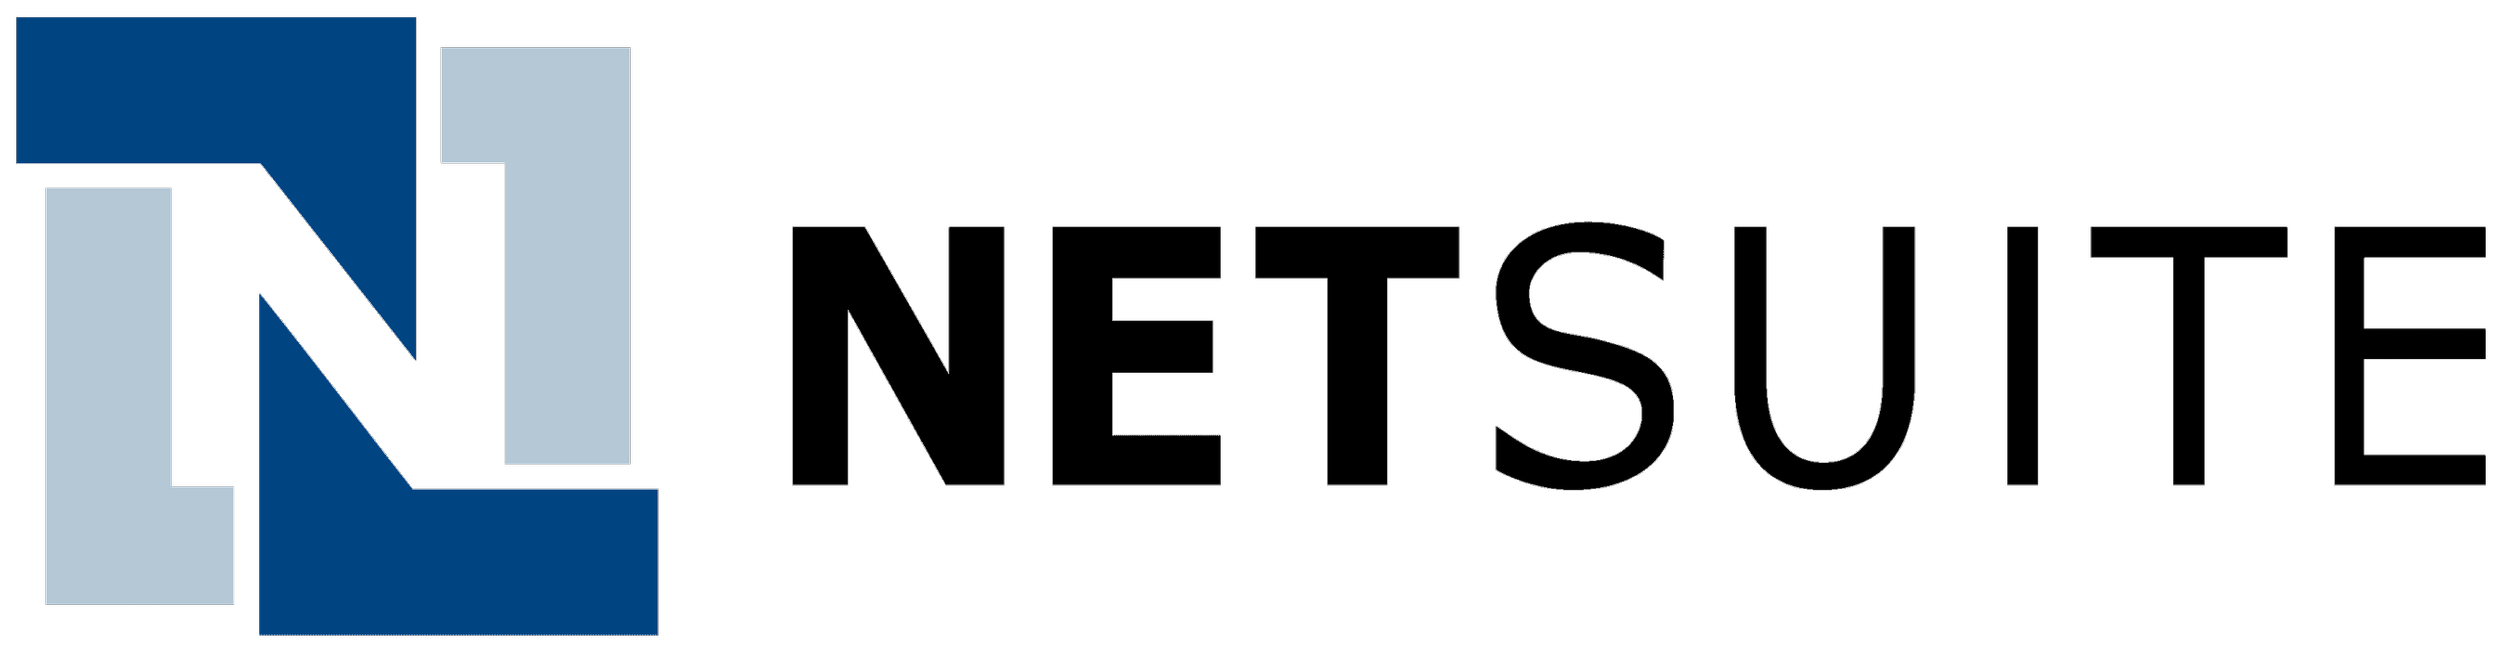 NetSuite-Logo.png